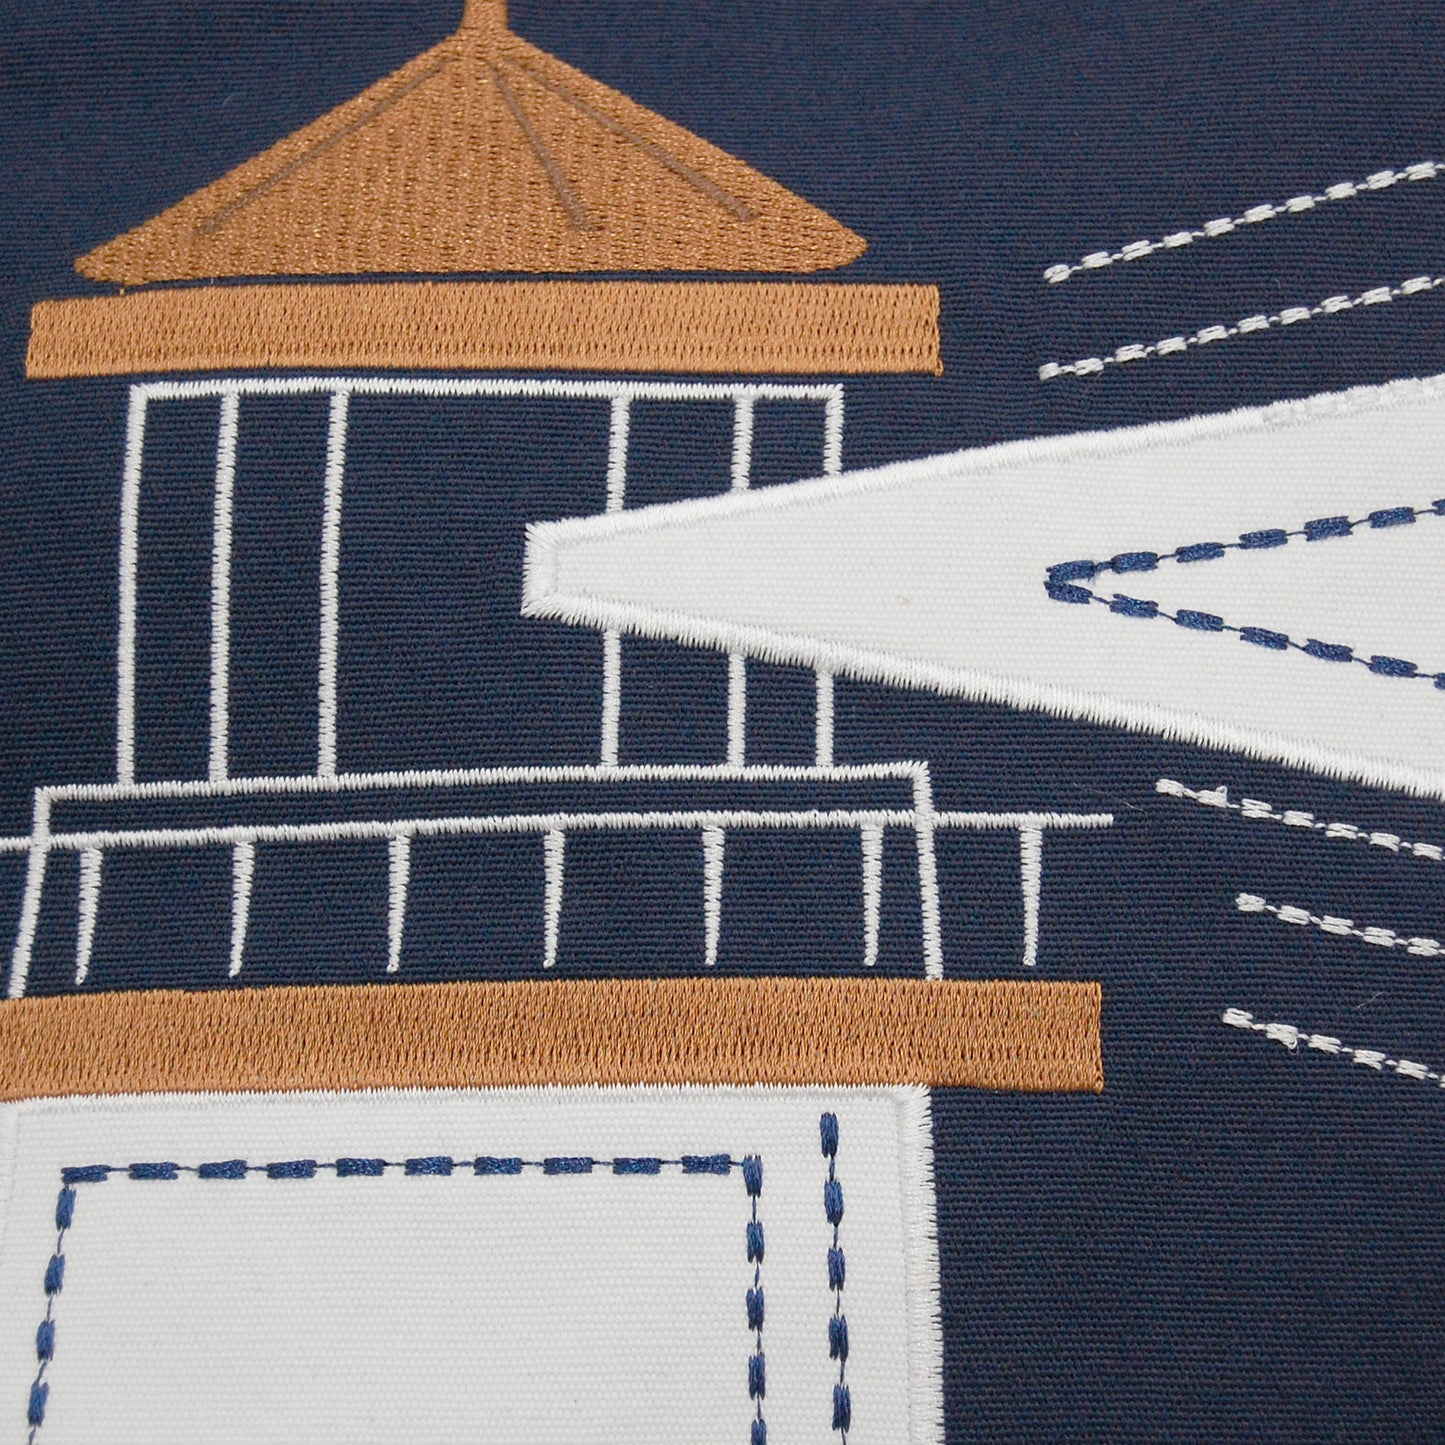 Detail shot of the Cape Series Lighthouse pillow.